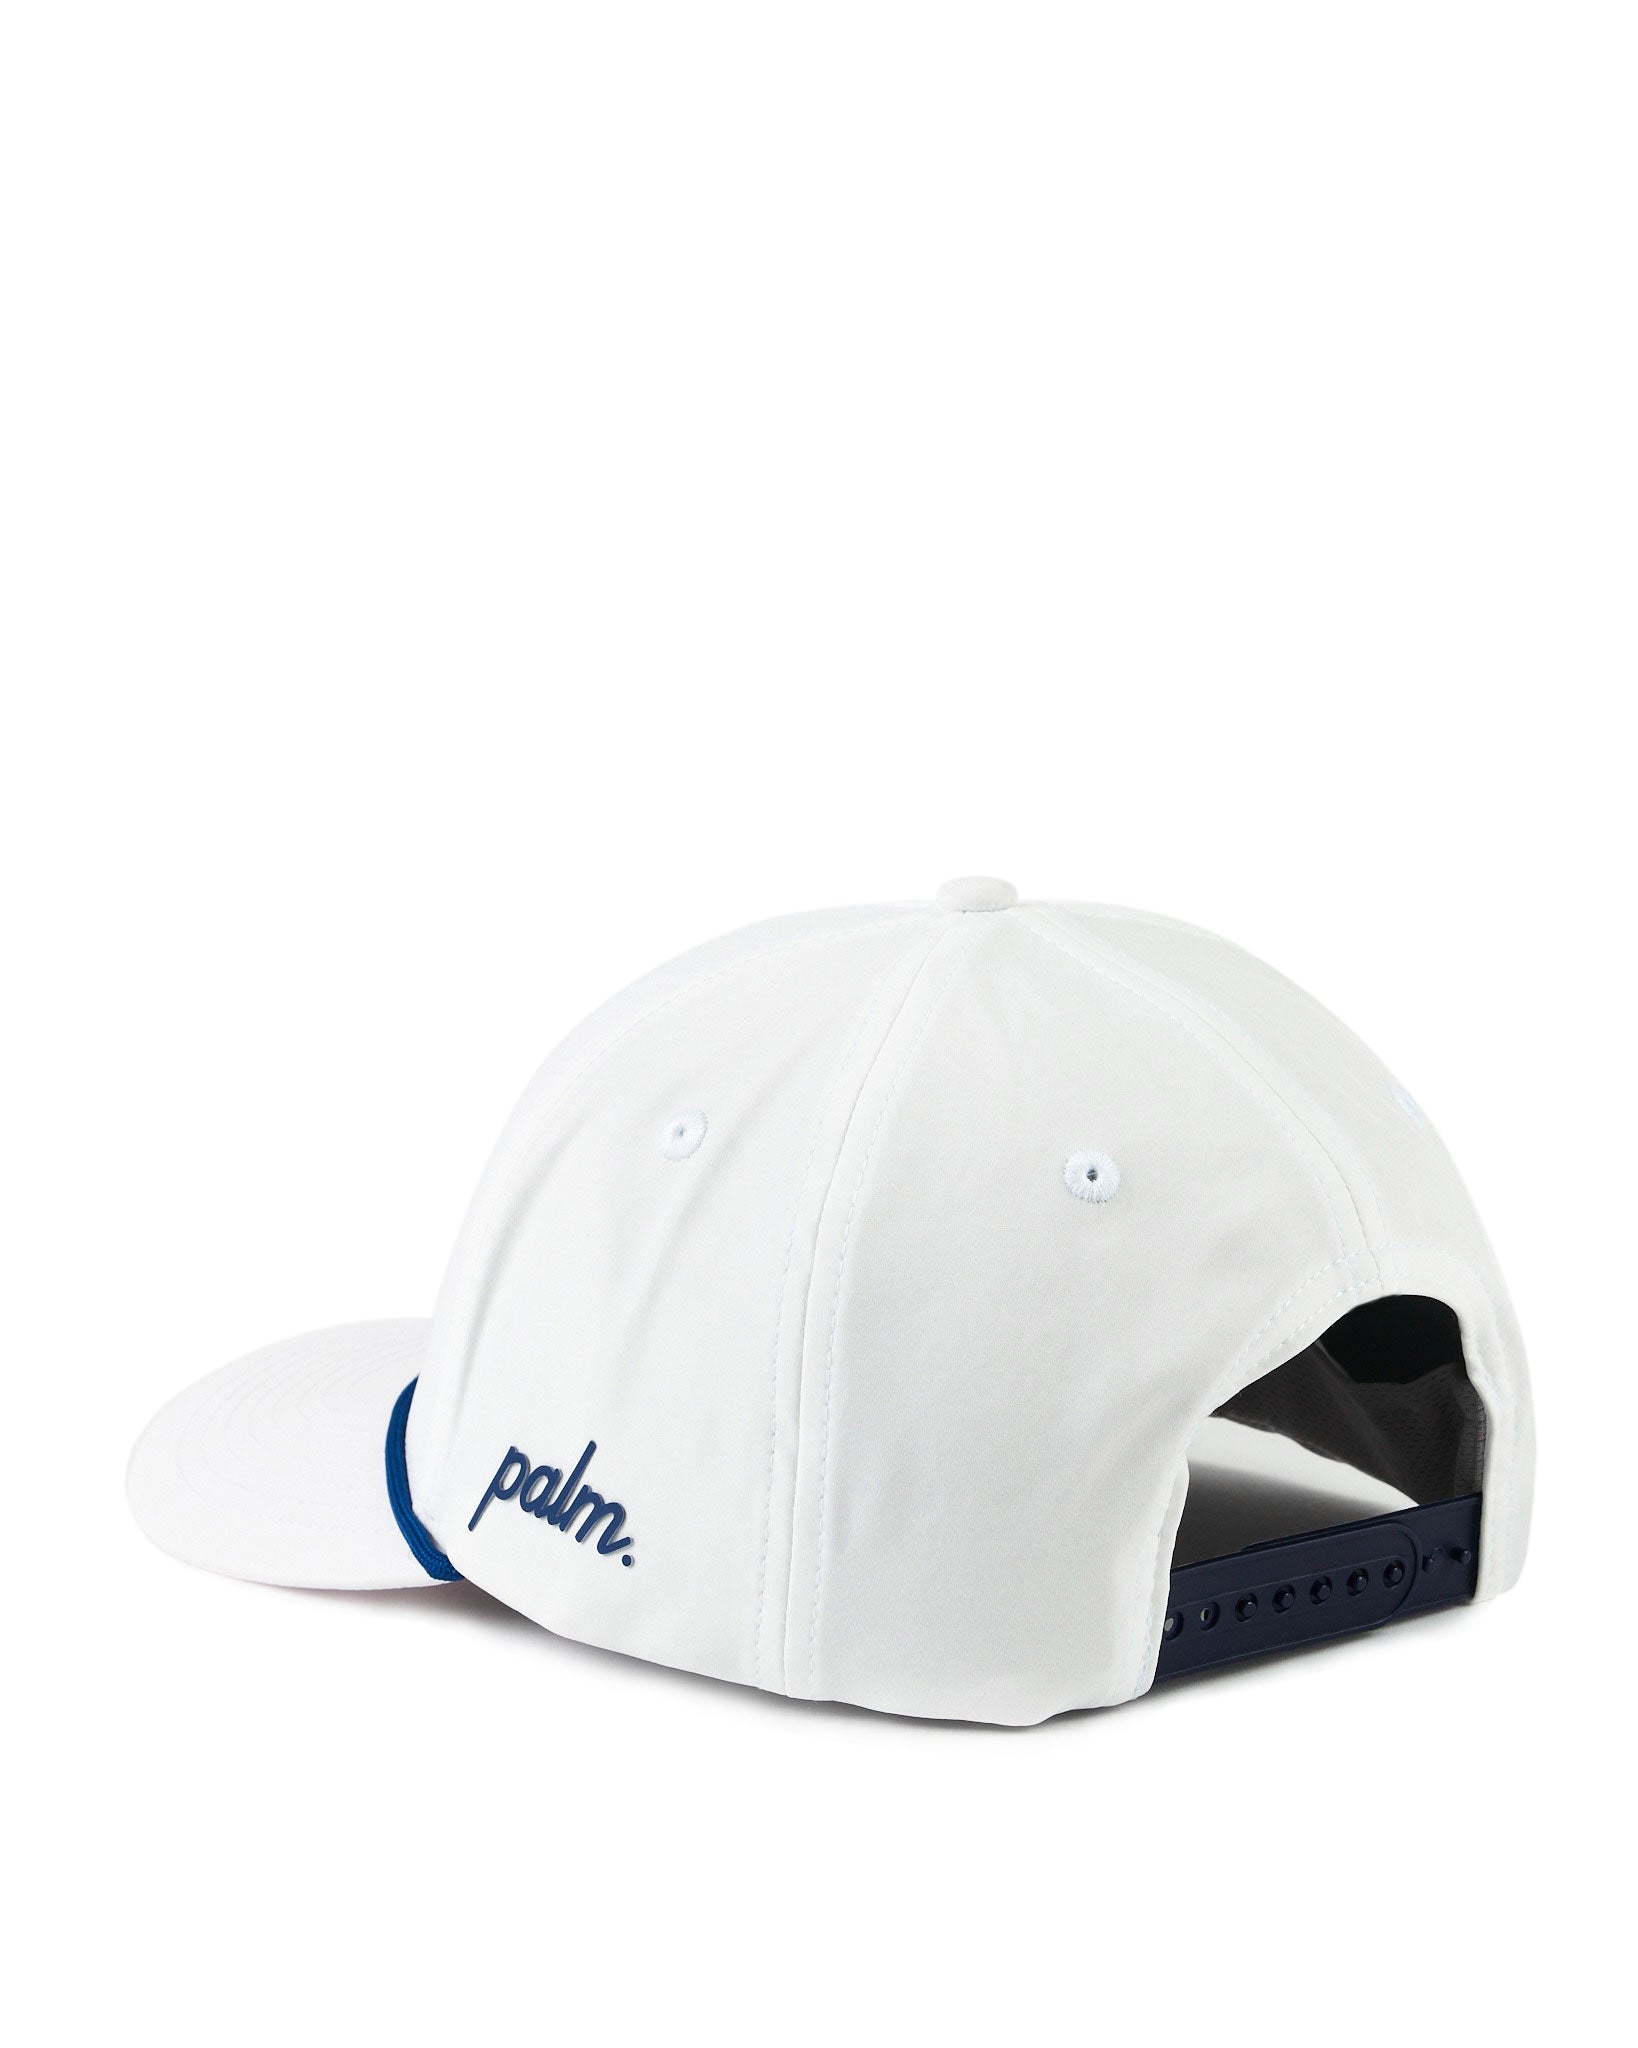 Palm Golf Co. The Captain Snapback (Mid-Crown)